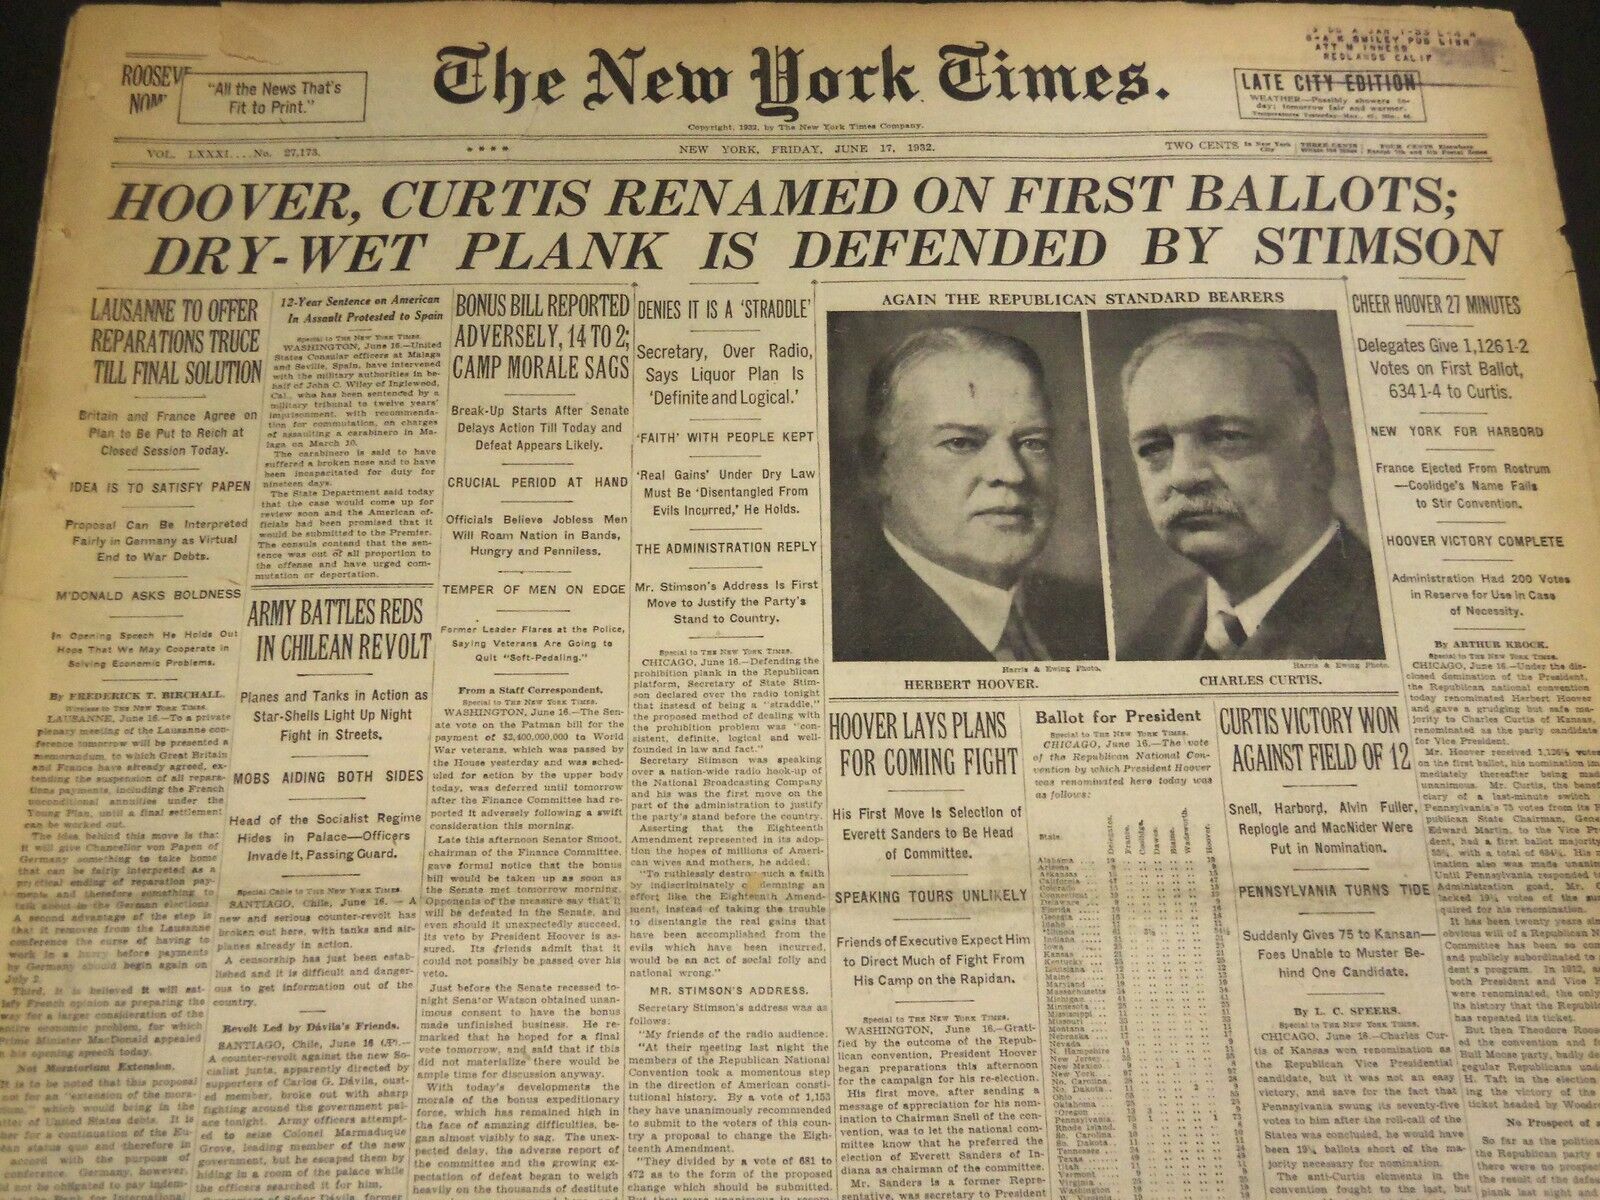 1932 JUNE 17 NEW YORK TIMES - HOOVER, CURTIS RENAMED ON FIRST BALLOTS - NT 4833